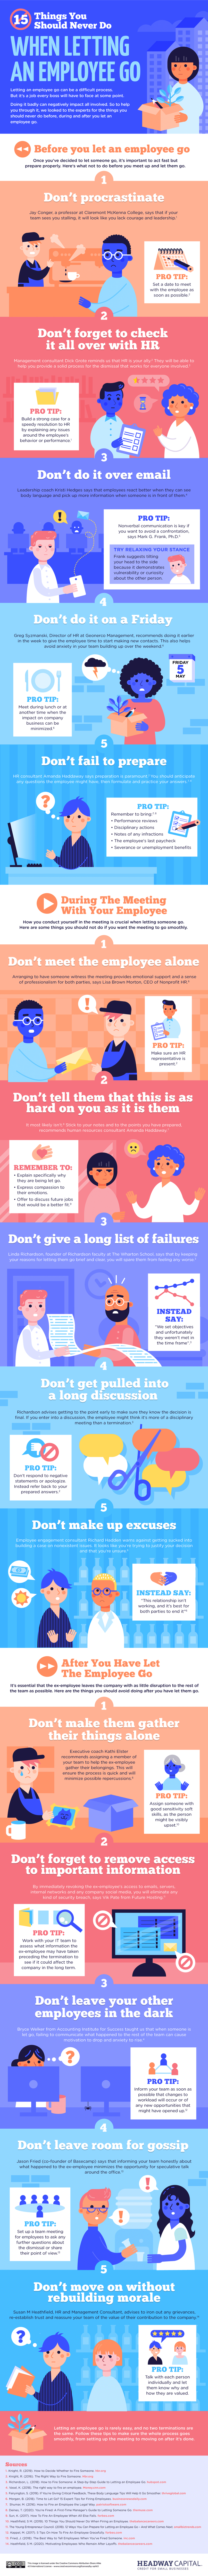 Infographic showing 15 things leaders should avoid when letting staff go.